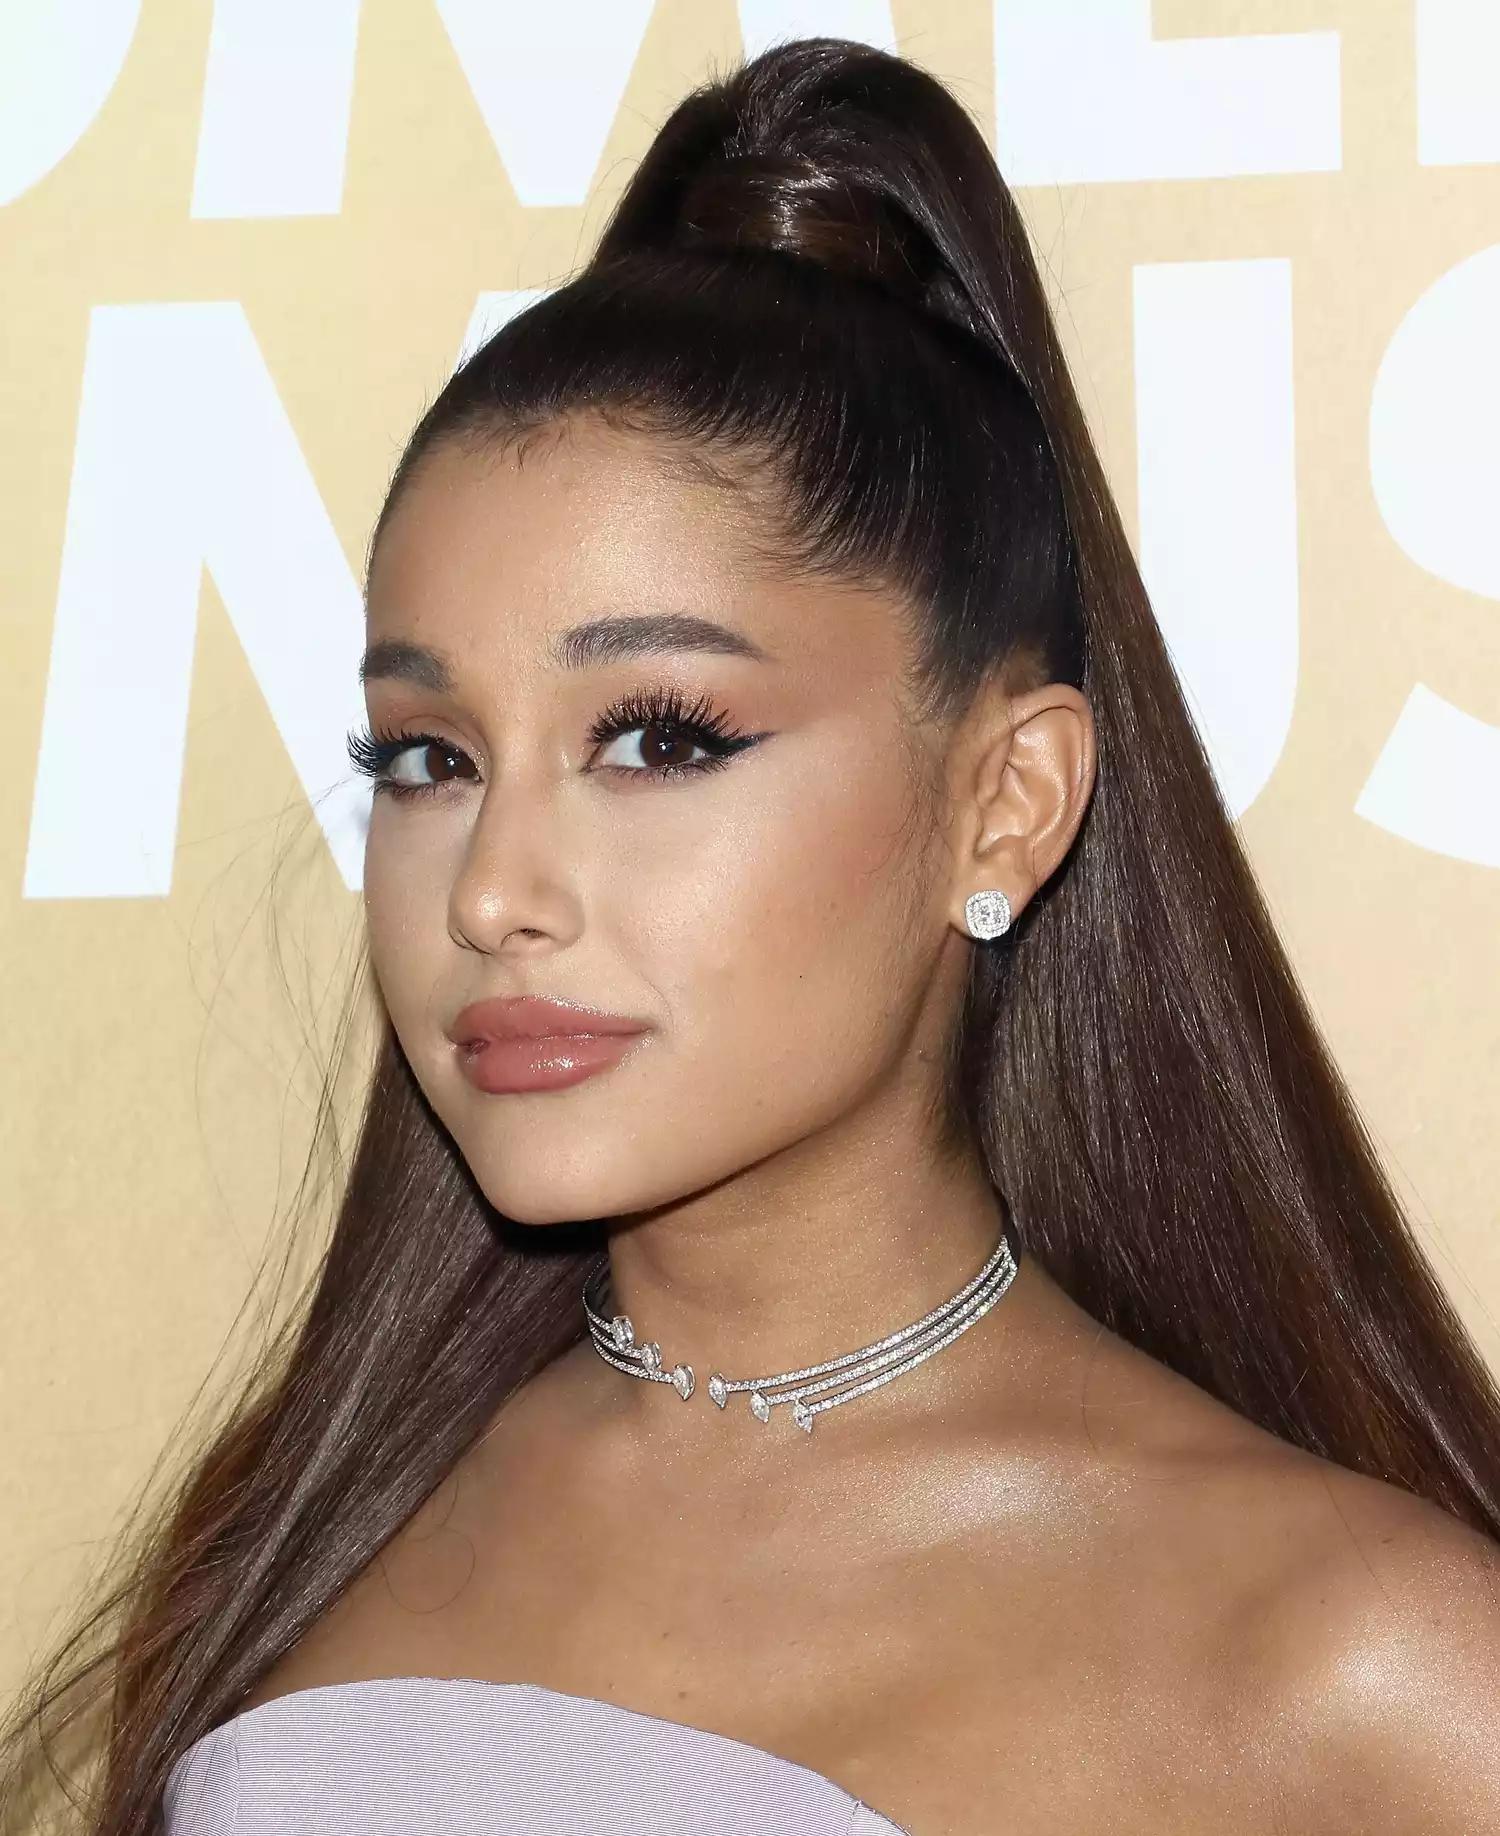 Ariana Grande Gets Real: From Lip Fillers to Embracing Natural Beauty on Vogue